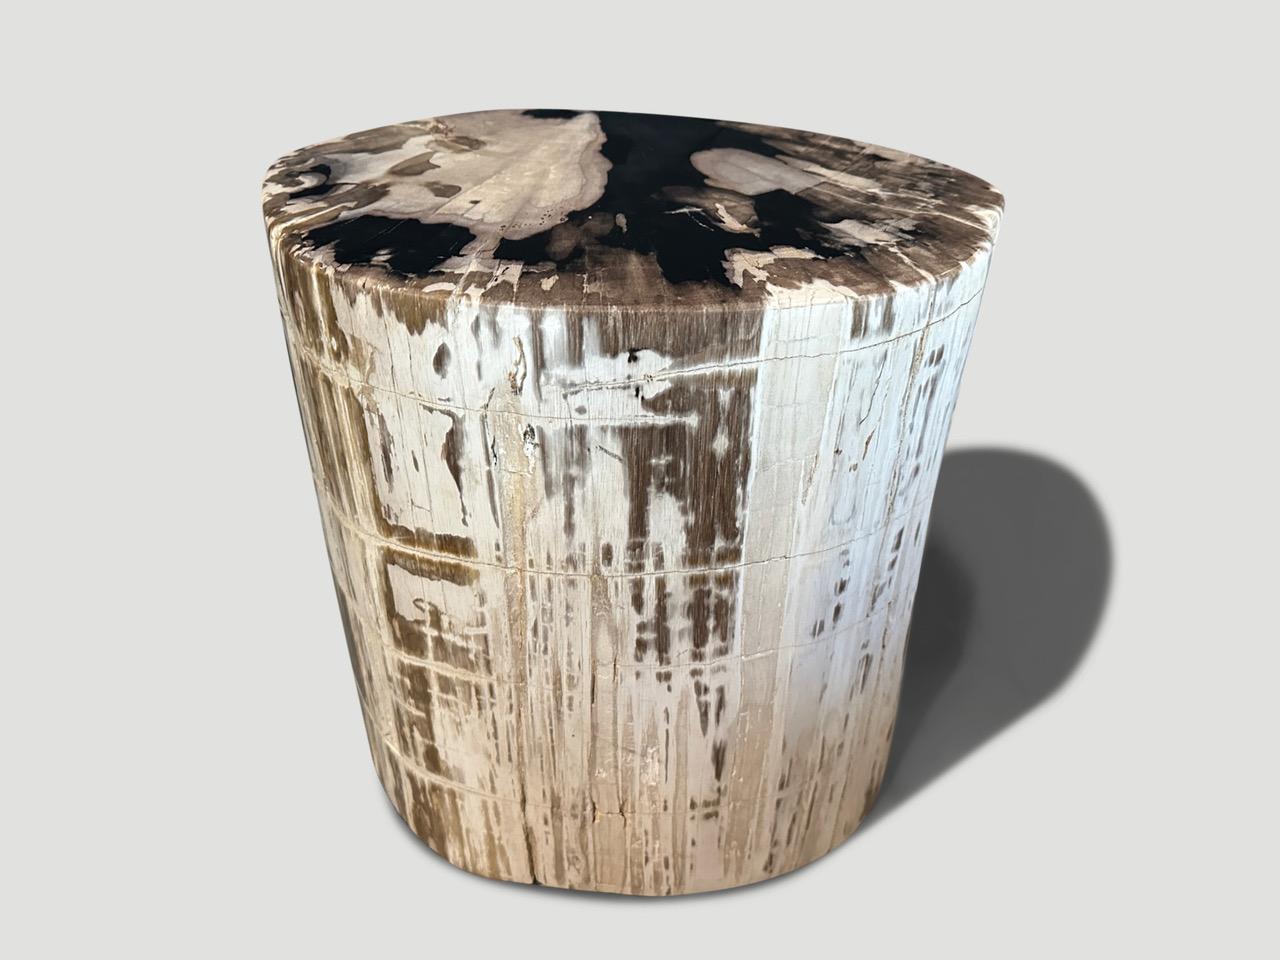 Impressive high quality petrified wood ancient side table with beautiful markings. It’s fascinating how Mother Nature produces these exquisite 40 million year old petrified teak logs with such contrasting colors and natural patterns throughout.